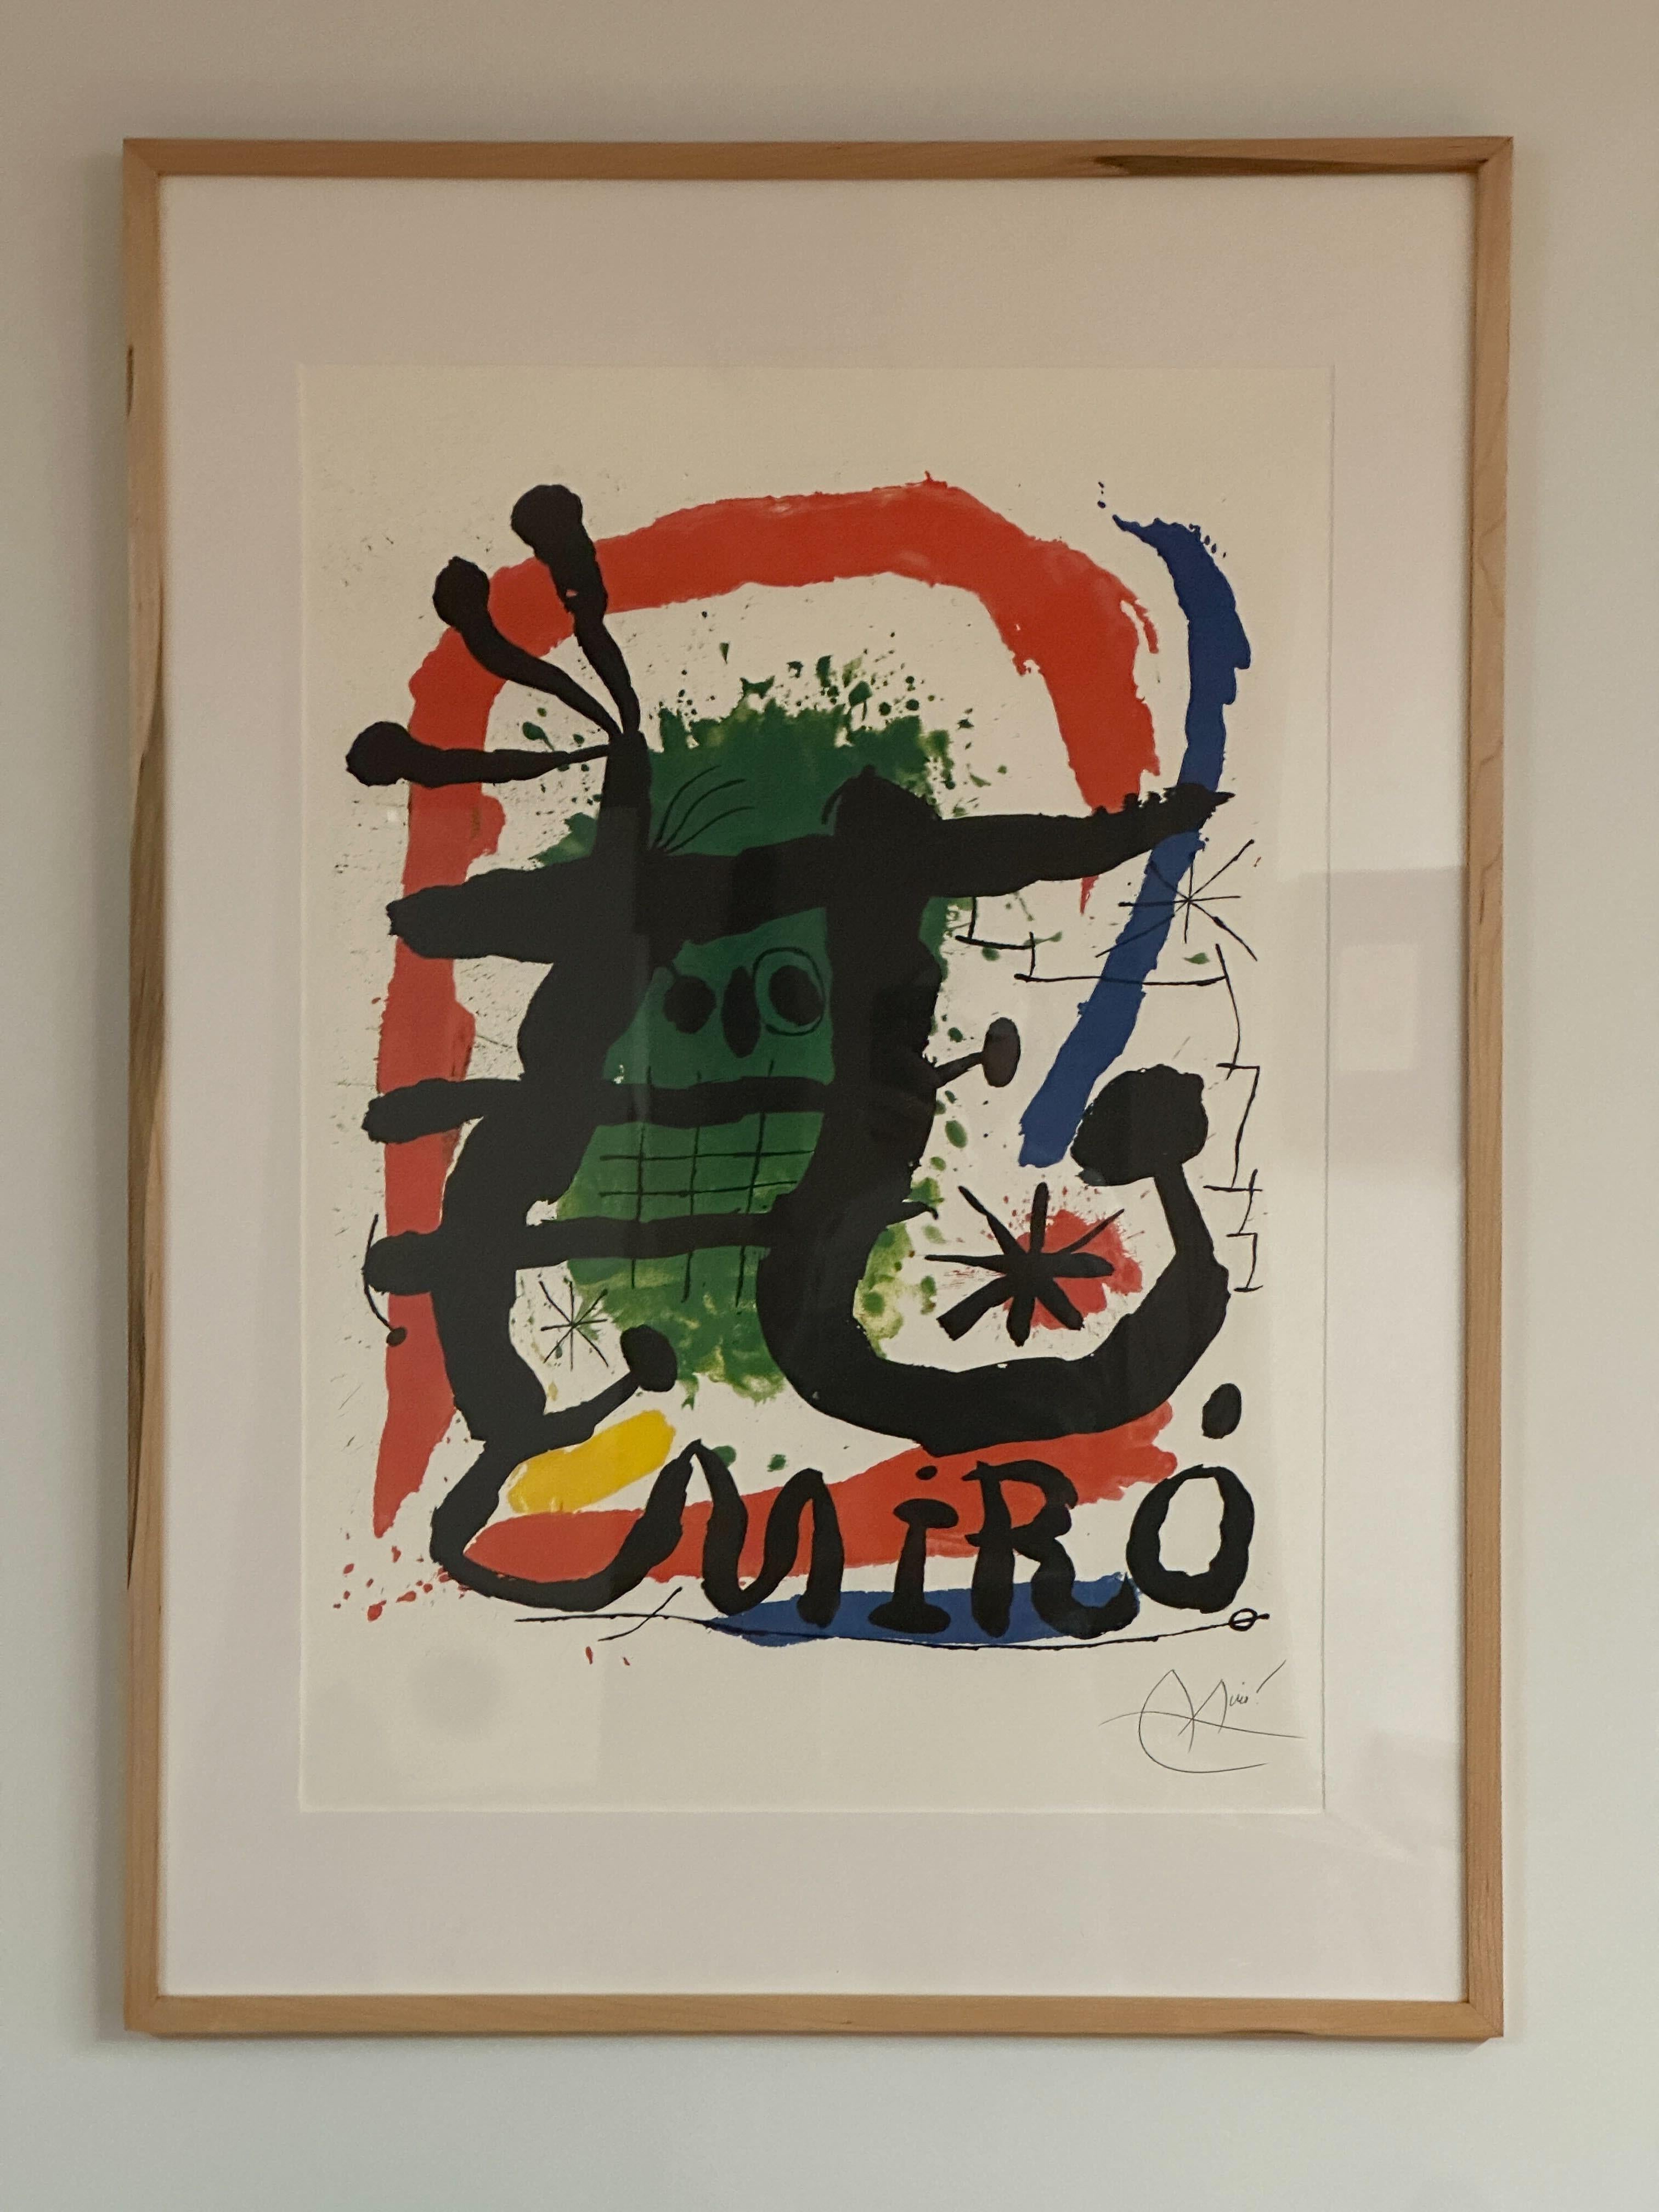 This Joan Miro lithograph in colors is in good overall condition and is framed 37